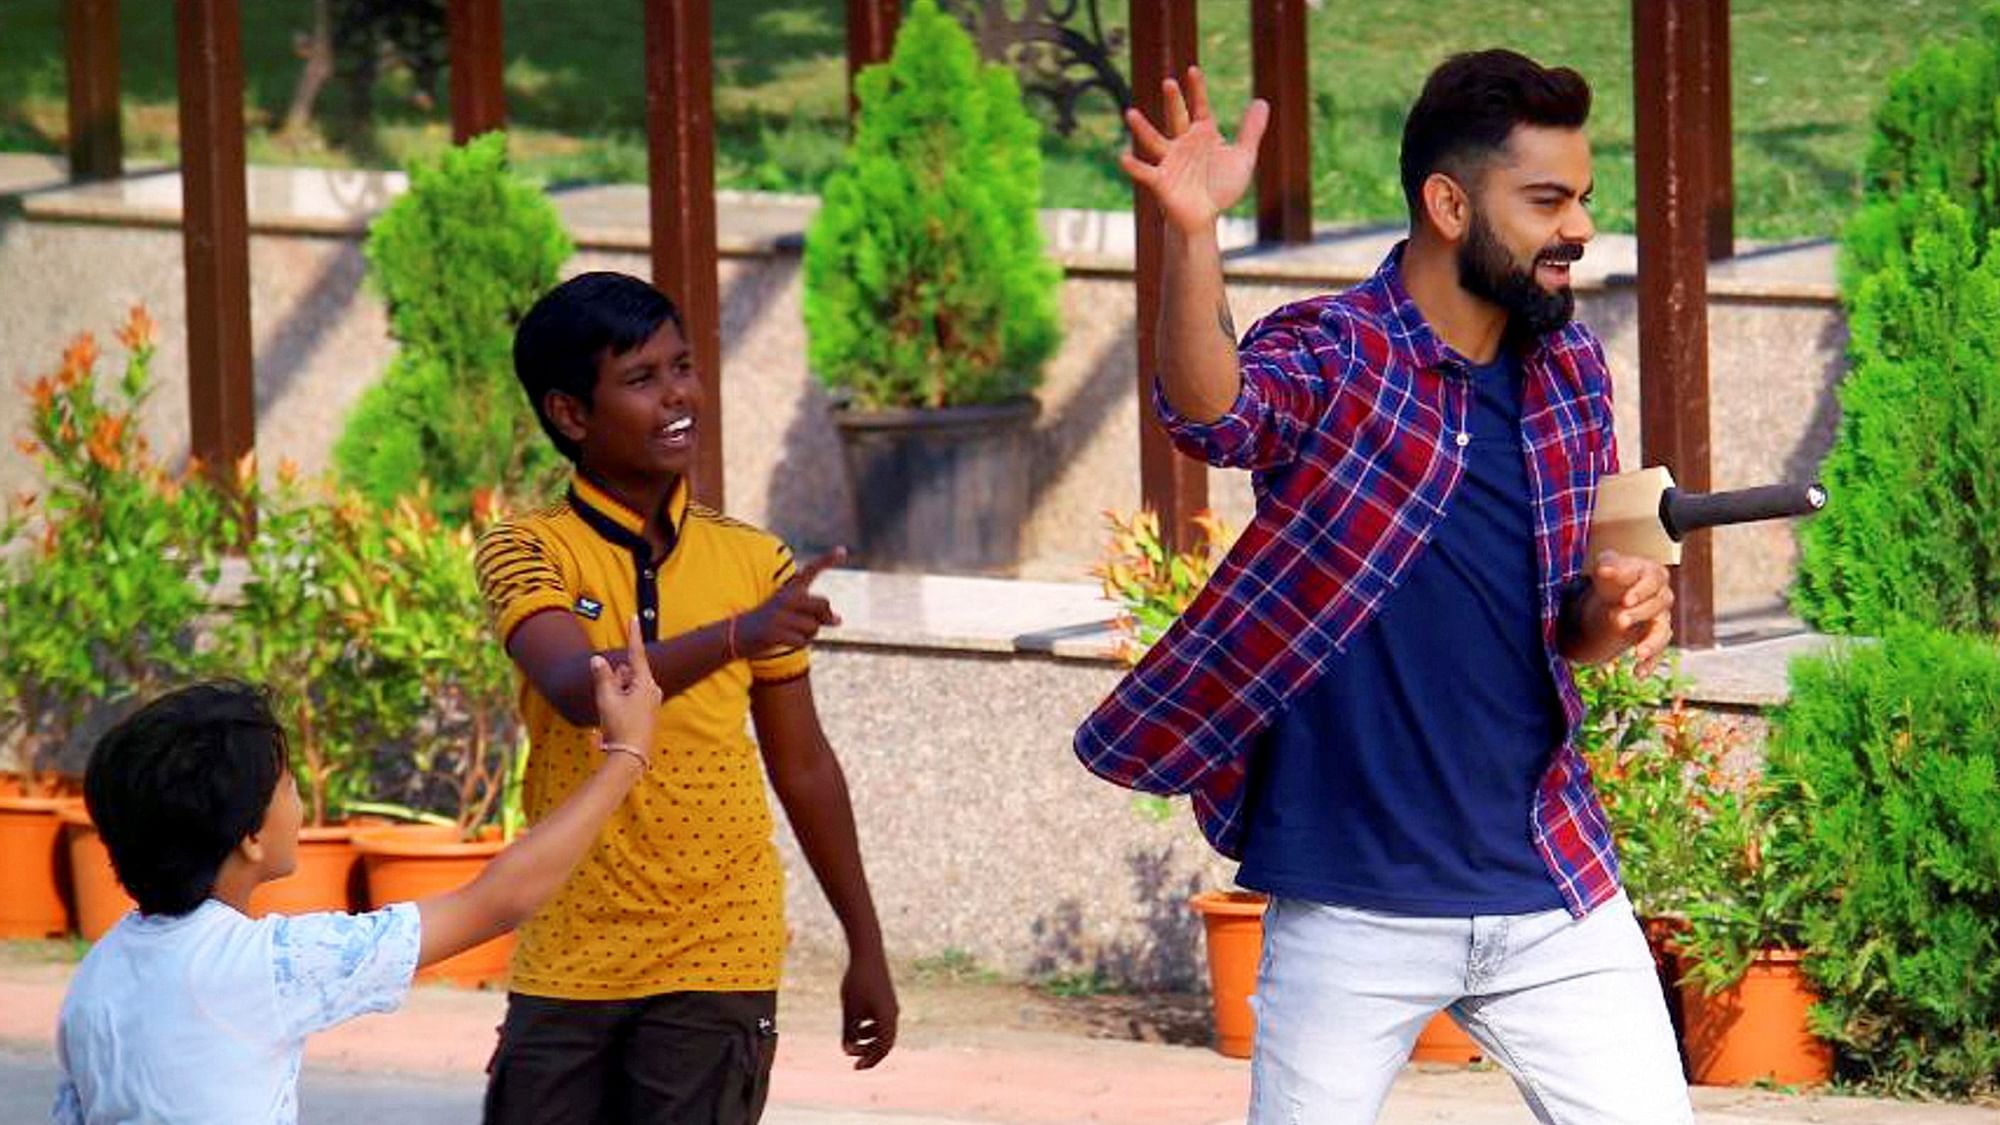 Indian captain Virat Kohli played gully (street) cricket with children during a shoot in Indore.